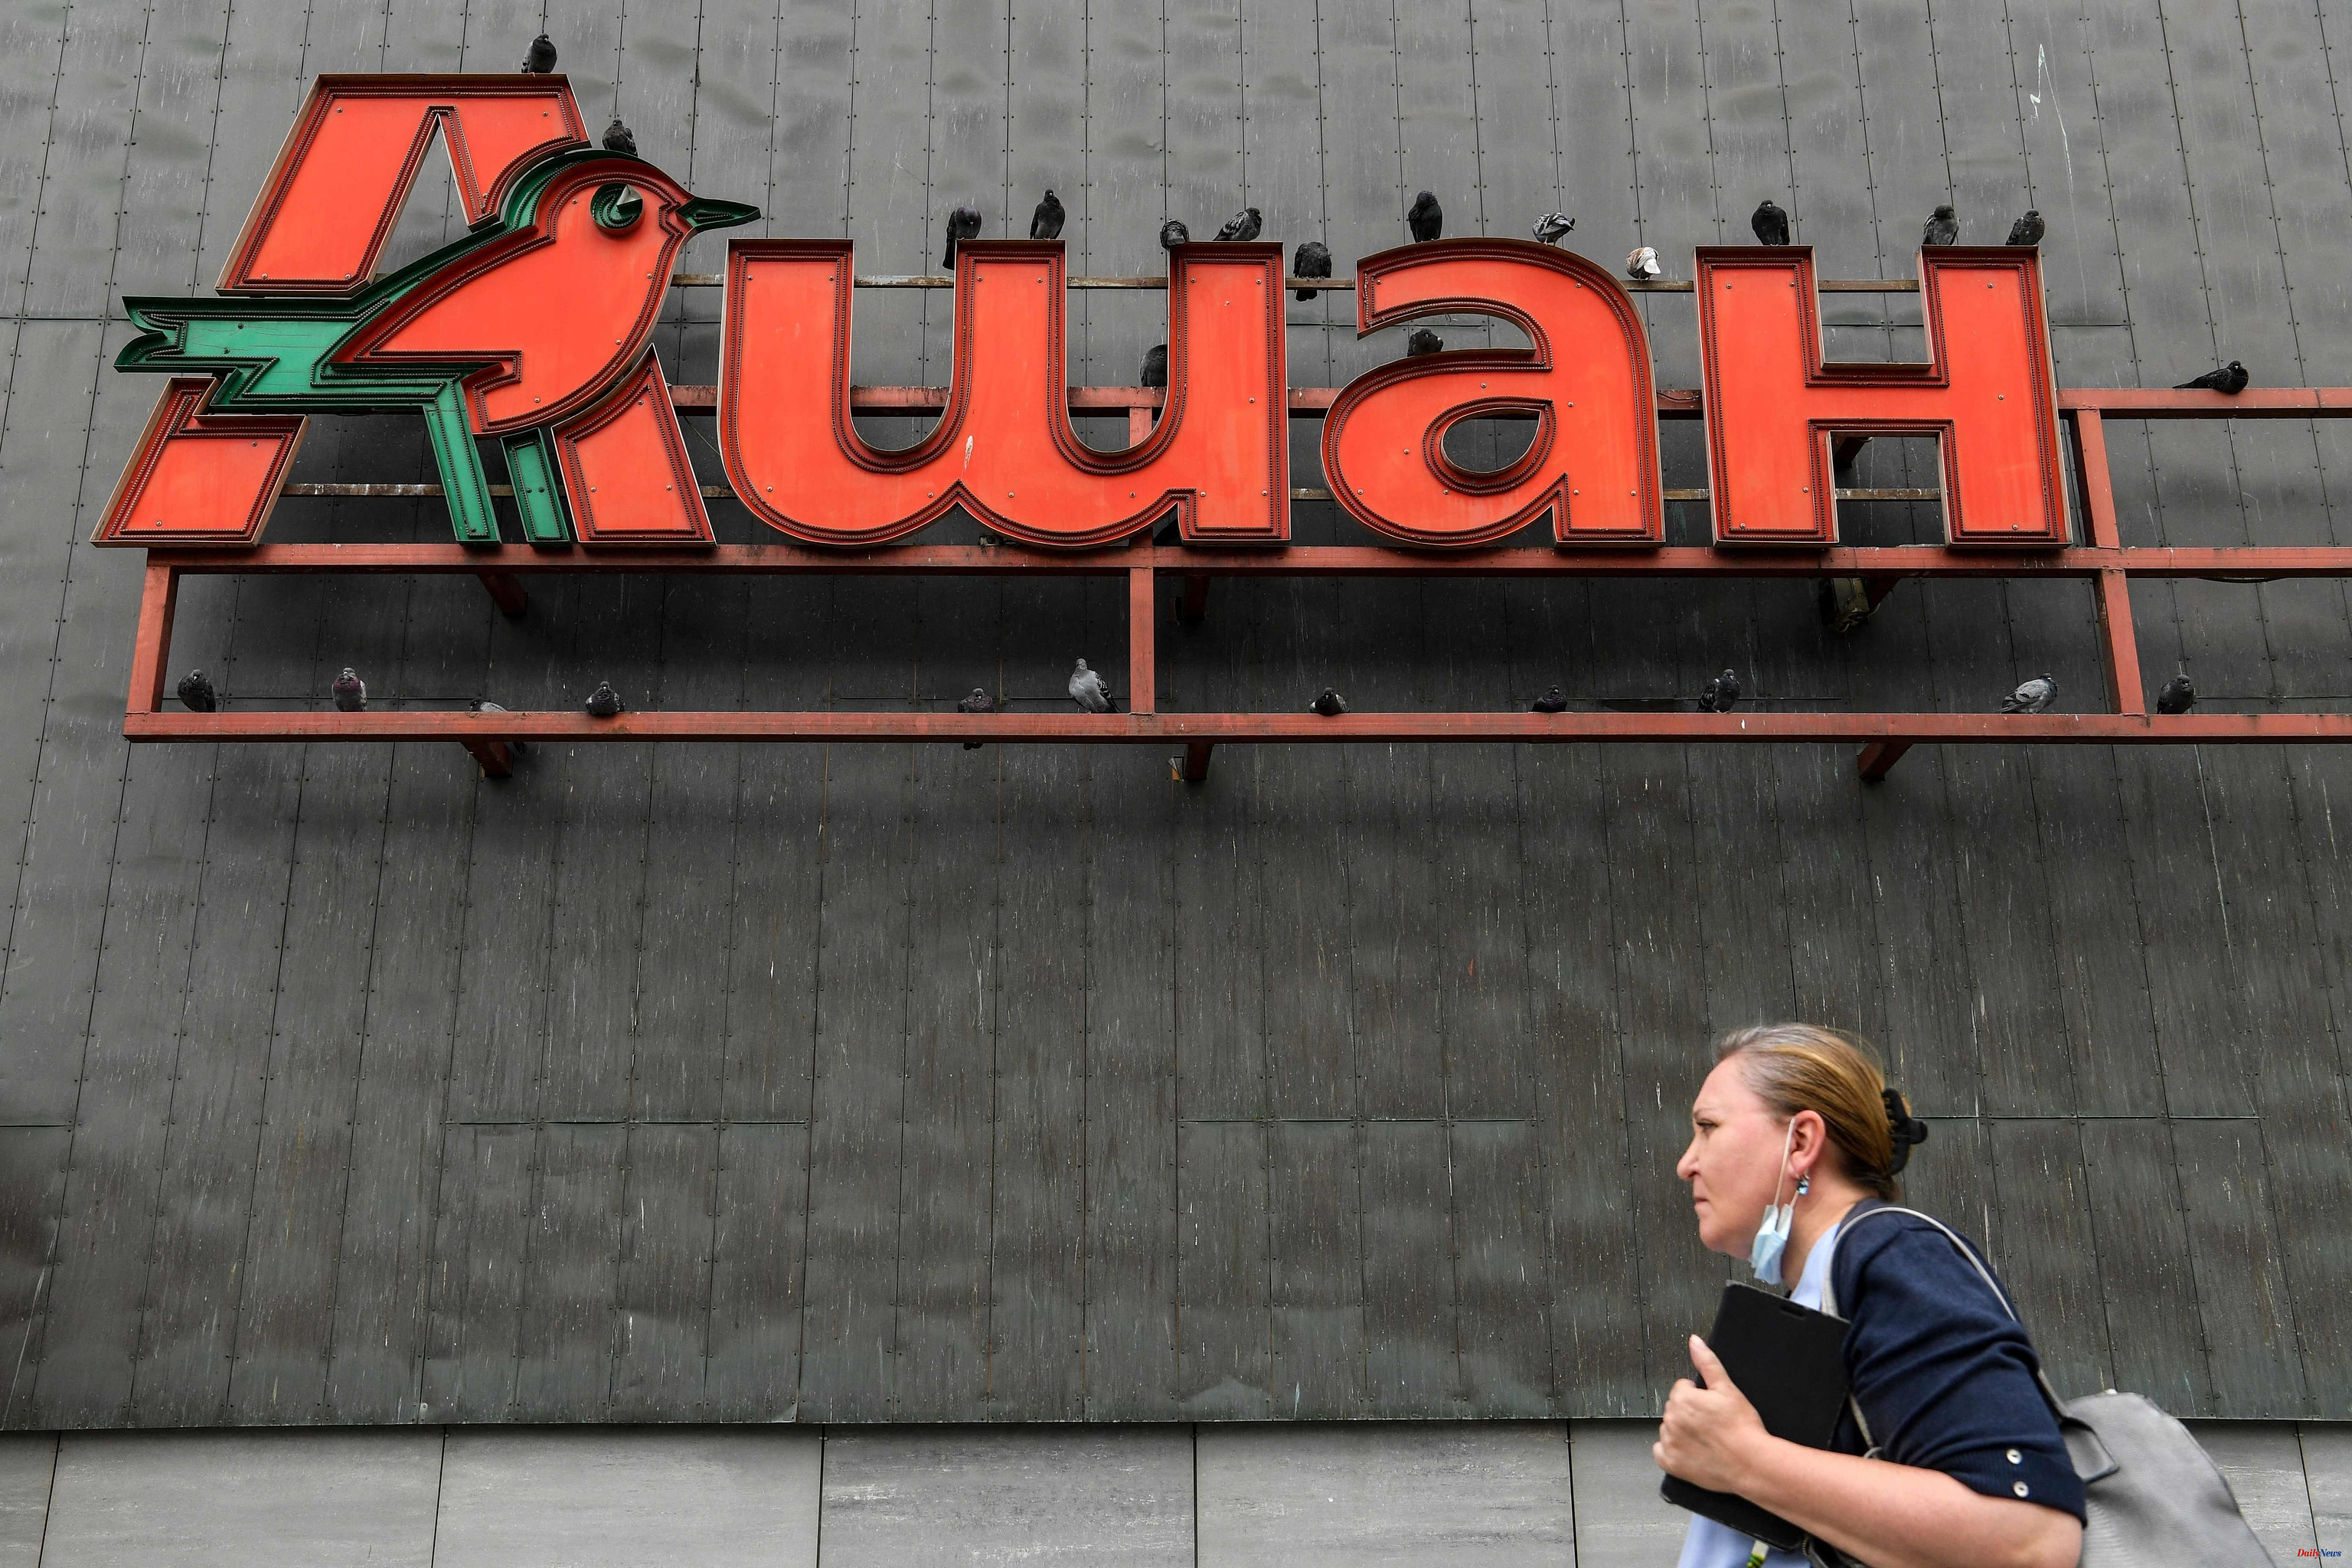 Economy Ukraine accuses the French group Auchan of supporting the Russian war in Ukraine